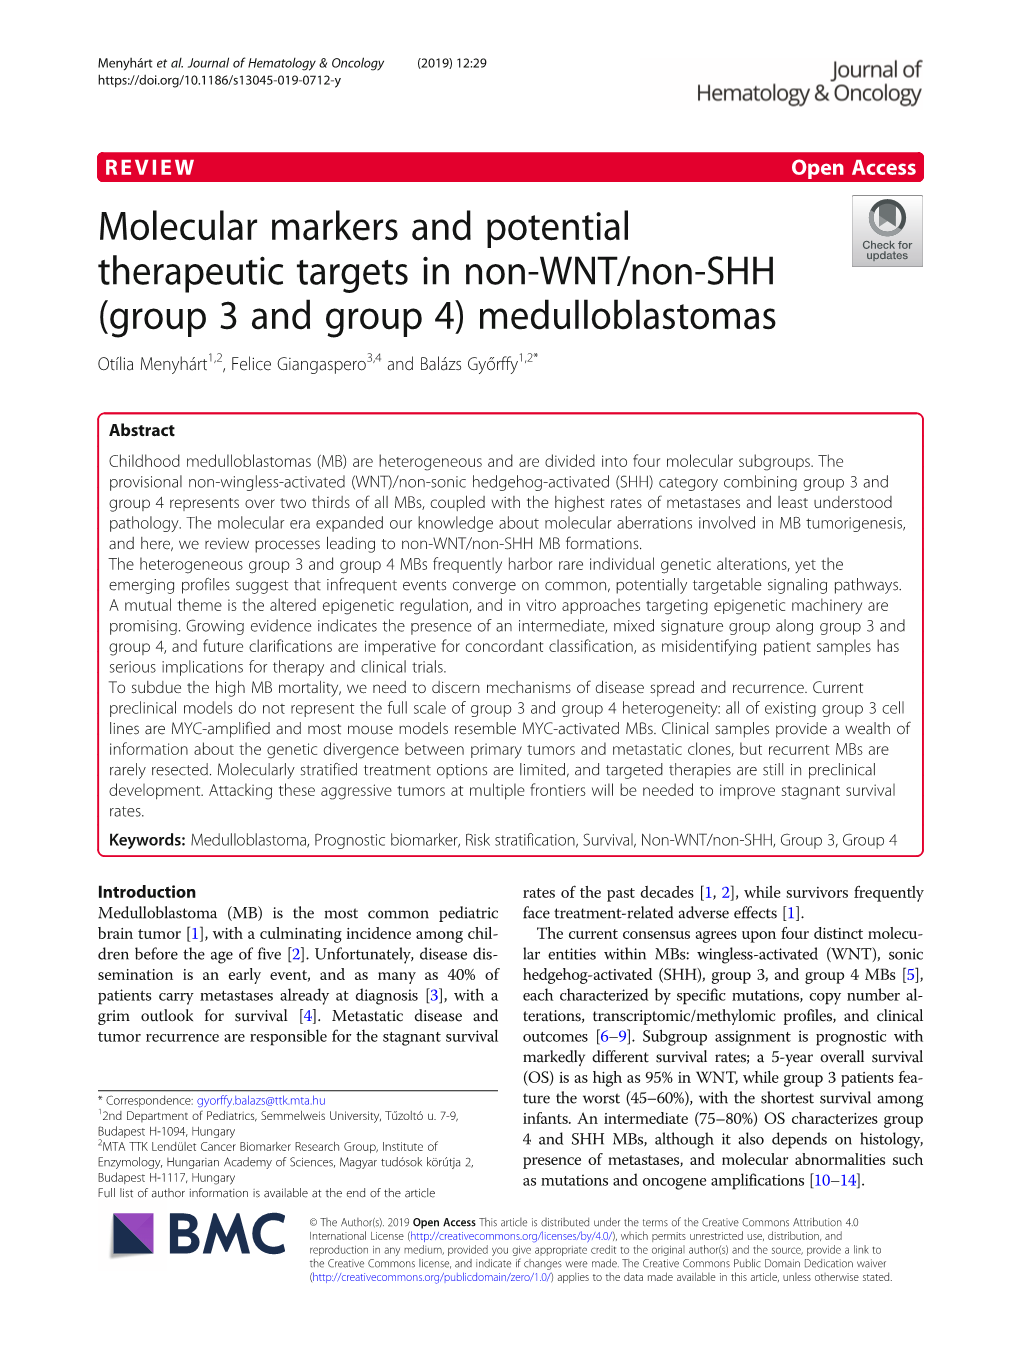 Molecular Markers and Potential Therapeutic Targets in Non-WNT/Non